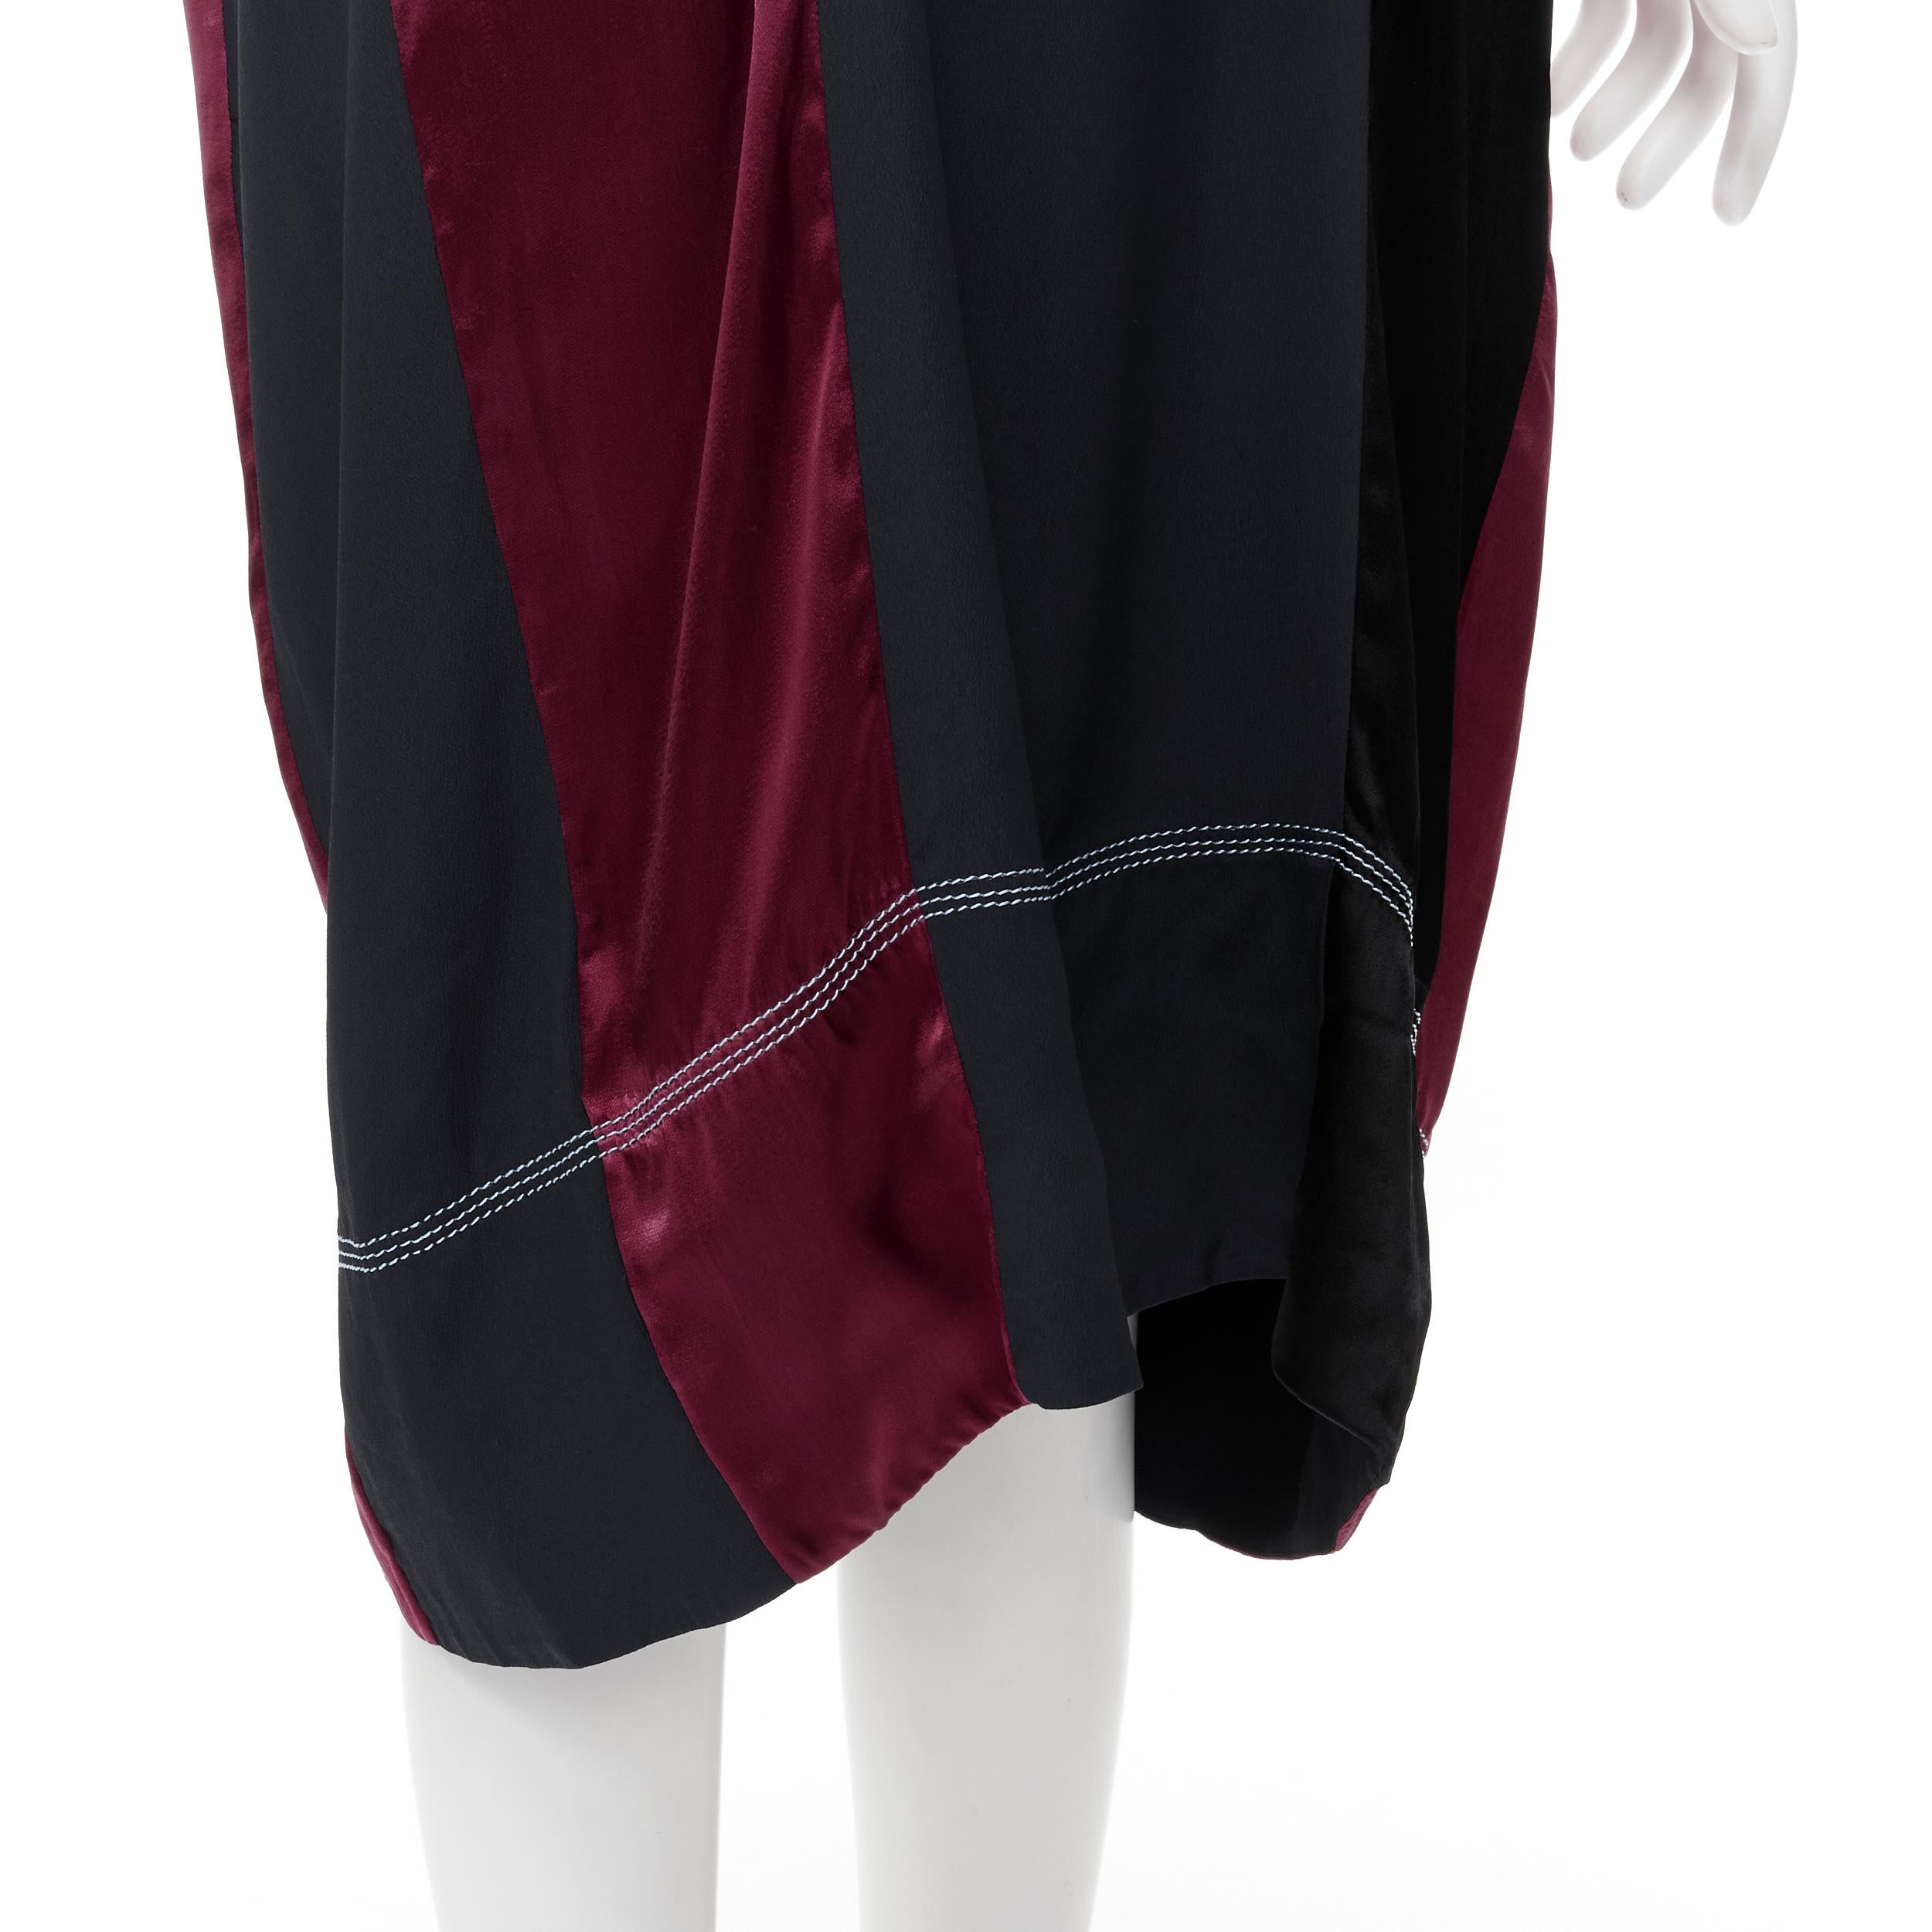 MARNI pink black navy silk color block overstitching oversized dress IT38 
Reference: CELG/A00207 
Brand: Marni 
Material: Viscose 
Color: Pink 
Pattern: Solid 
Extra Detail: Angular square cut neckline. 
Made in: Italy 

CONDITION: 
Condition: